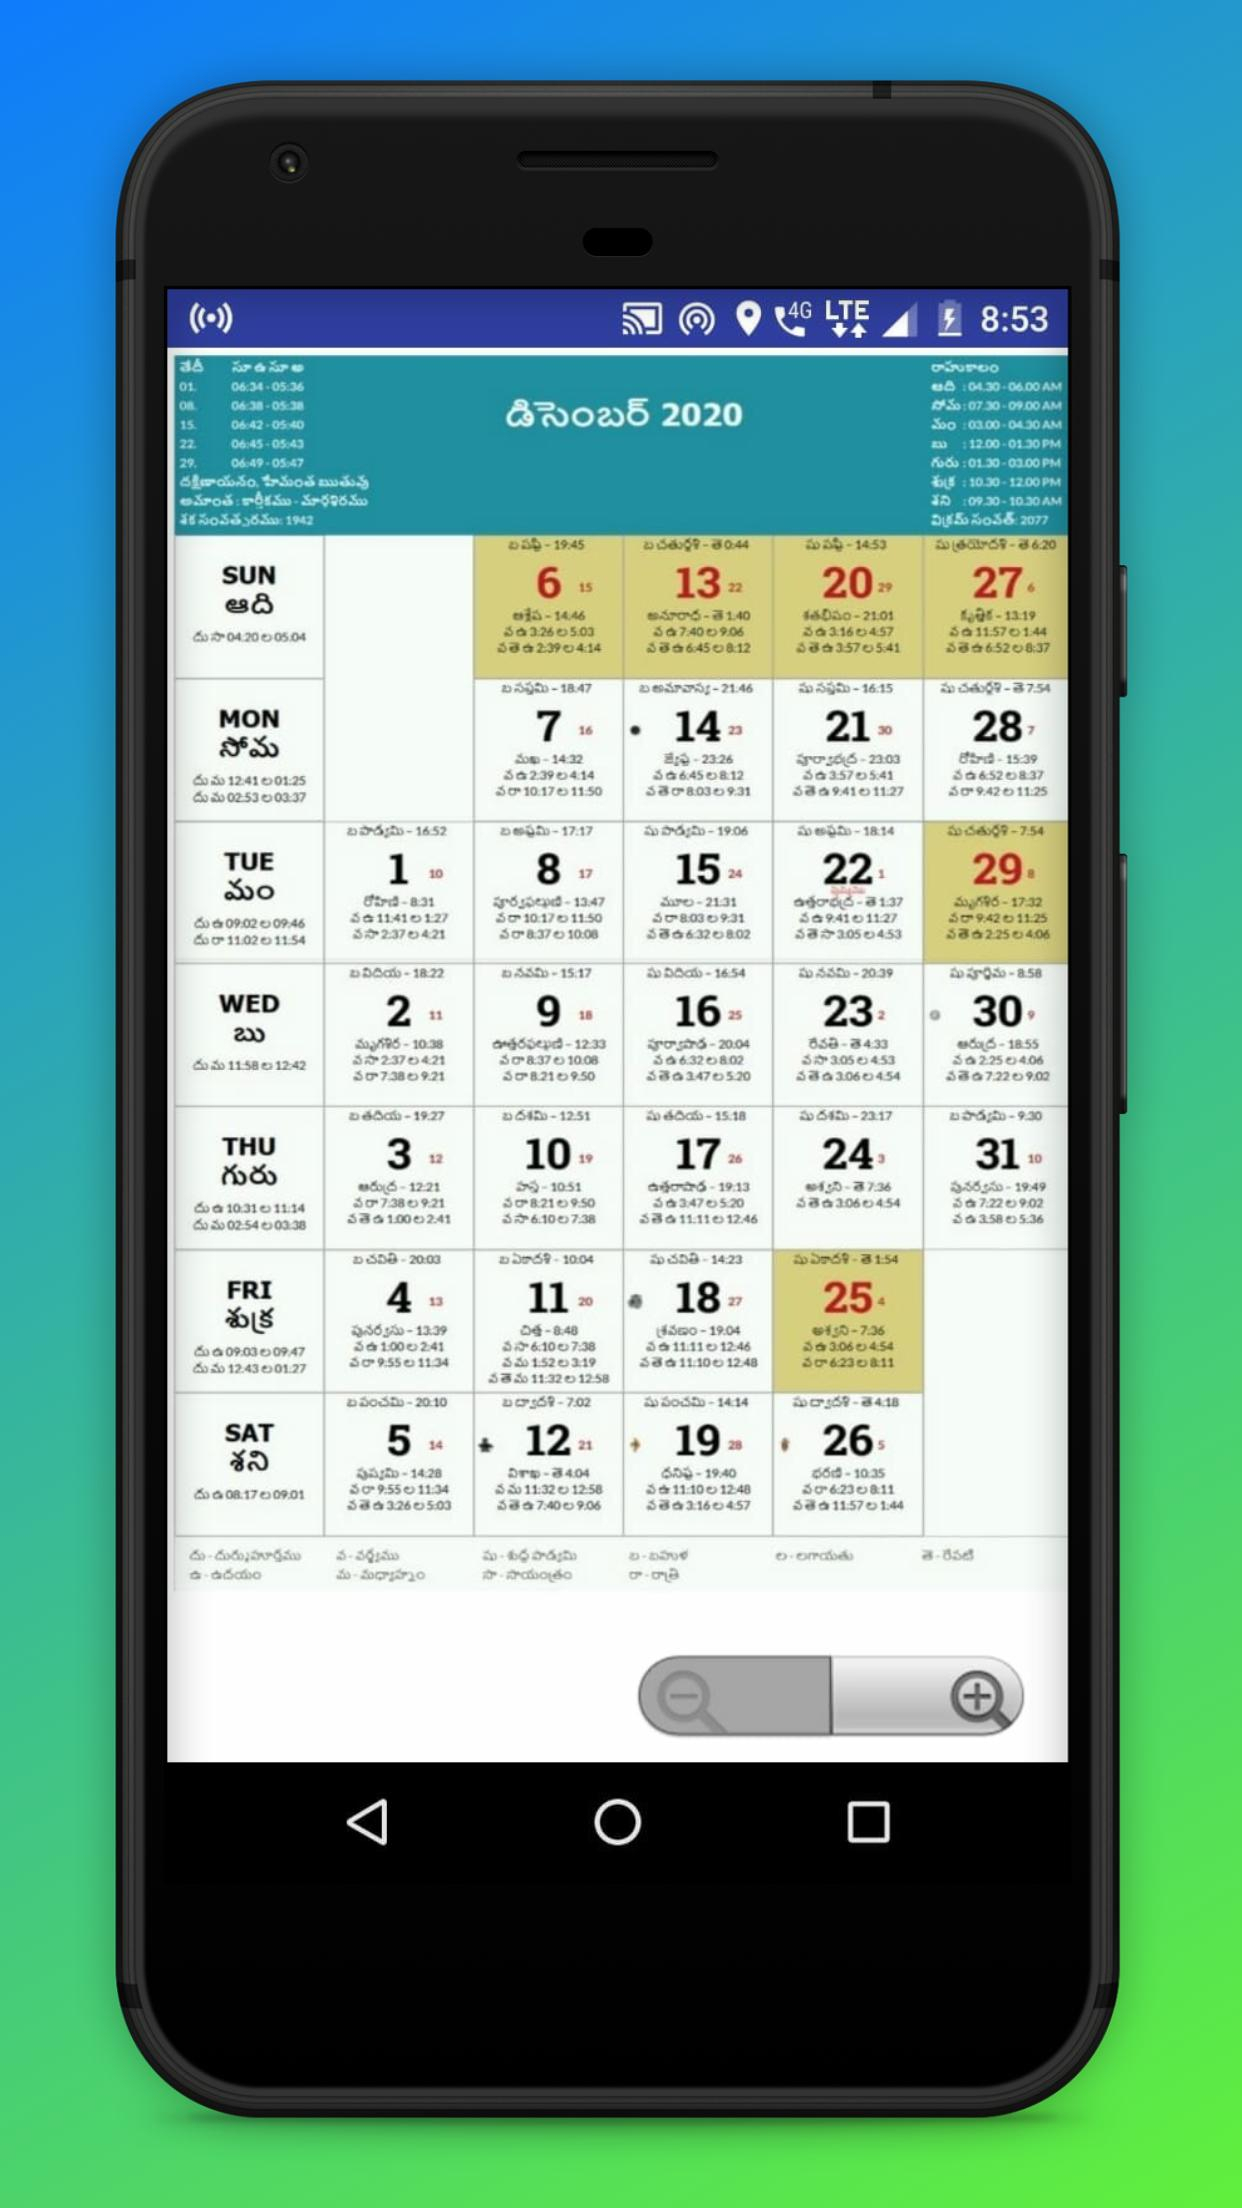 Telugu Calendar 2020 With Festival For Android - Apk Download